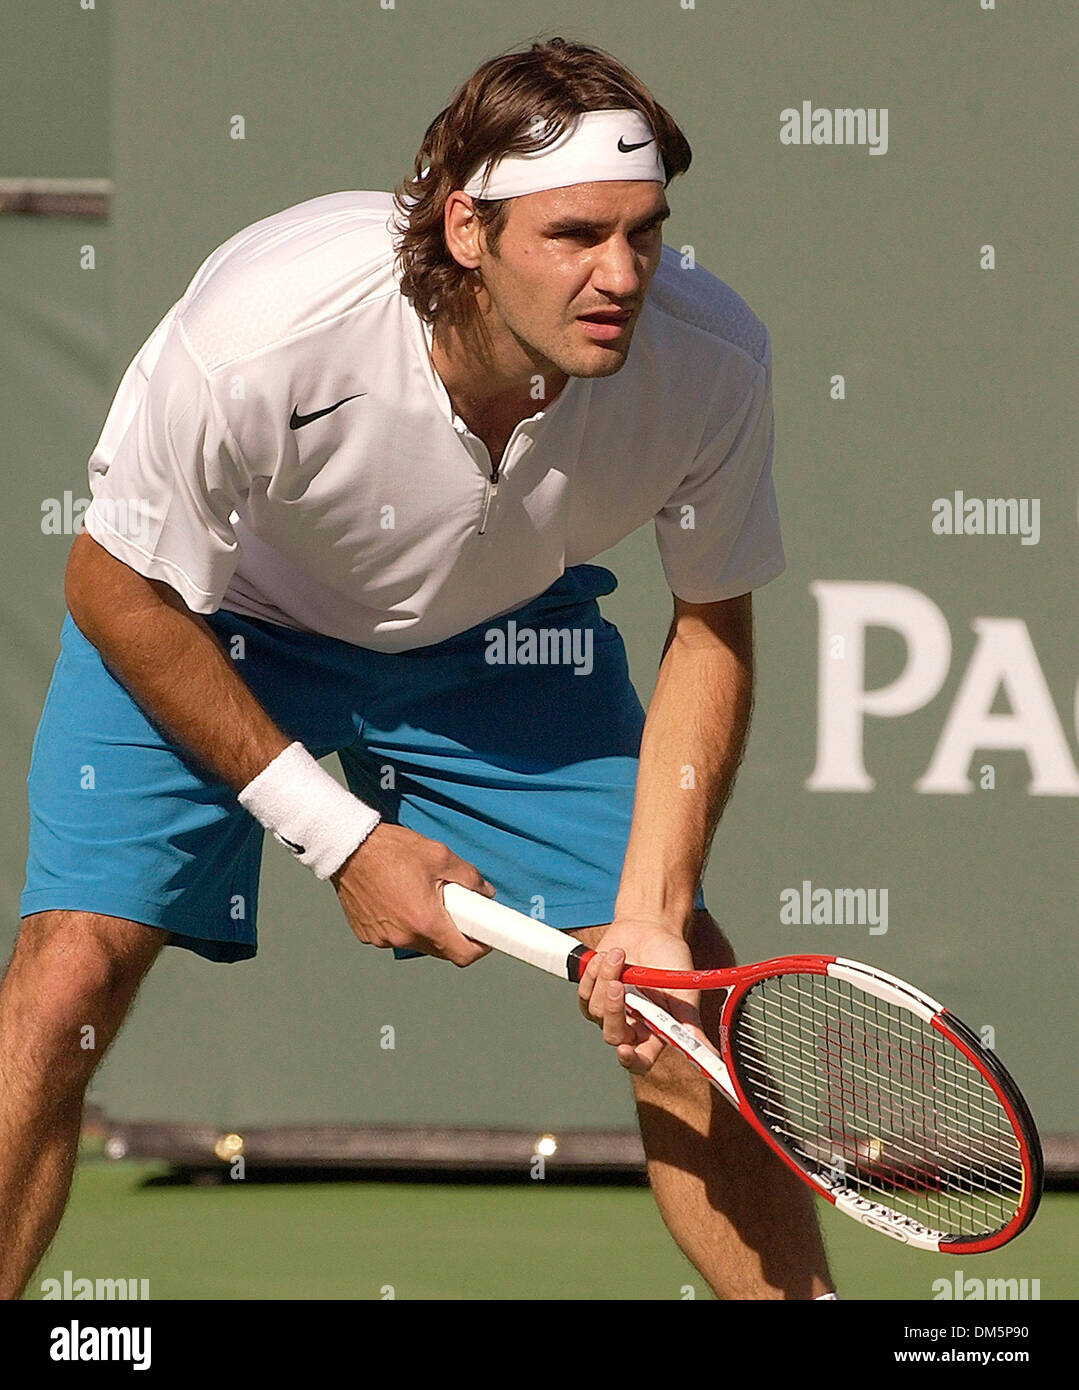 March 15, 2005; Indian Wells, CA, USA; APT tennis pro ROGER FEDERER during  a match at the 2005 Pacific Life Open at the Indian Wells Tennis Garden  Stock Photo - Alamy